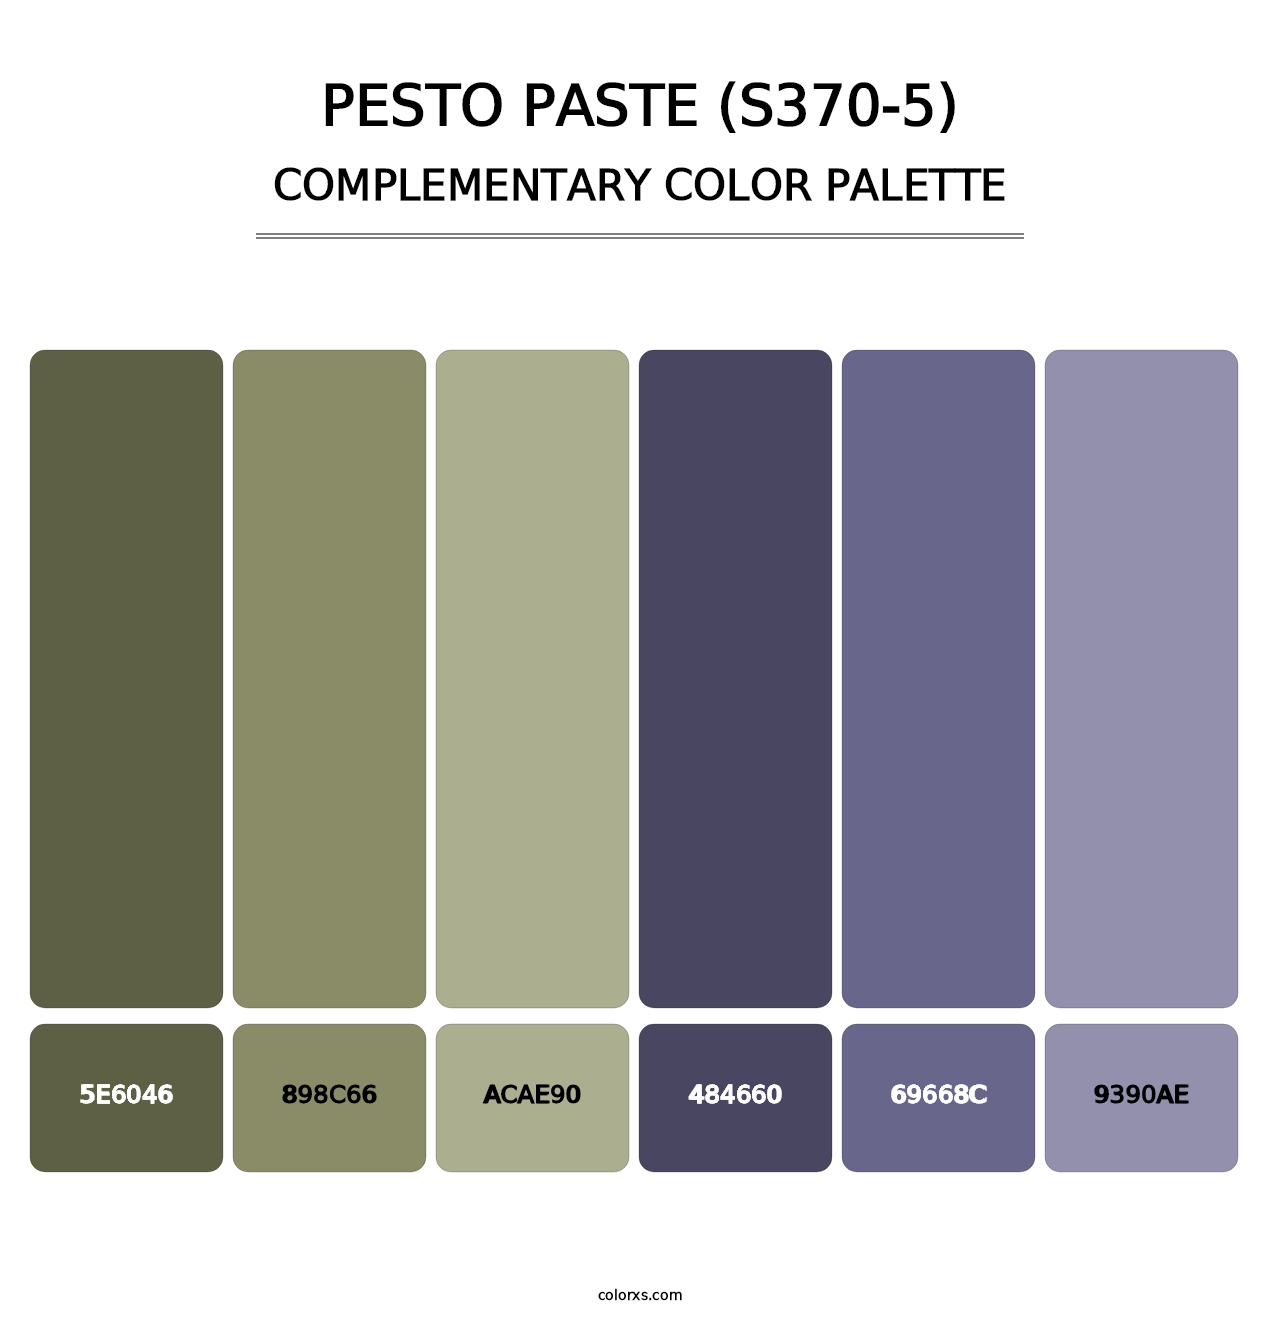 Pesto Paste (S370-5) - Complementary Color Palette